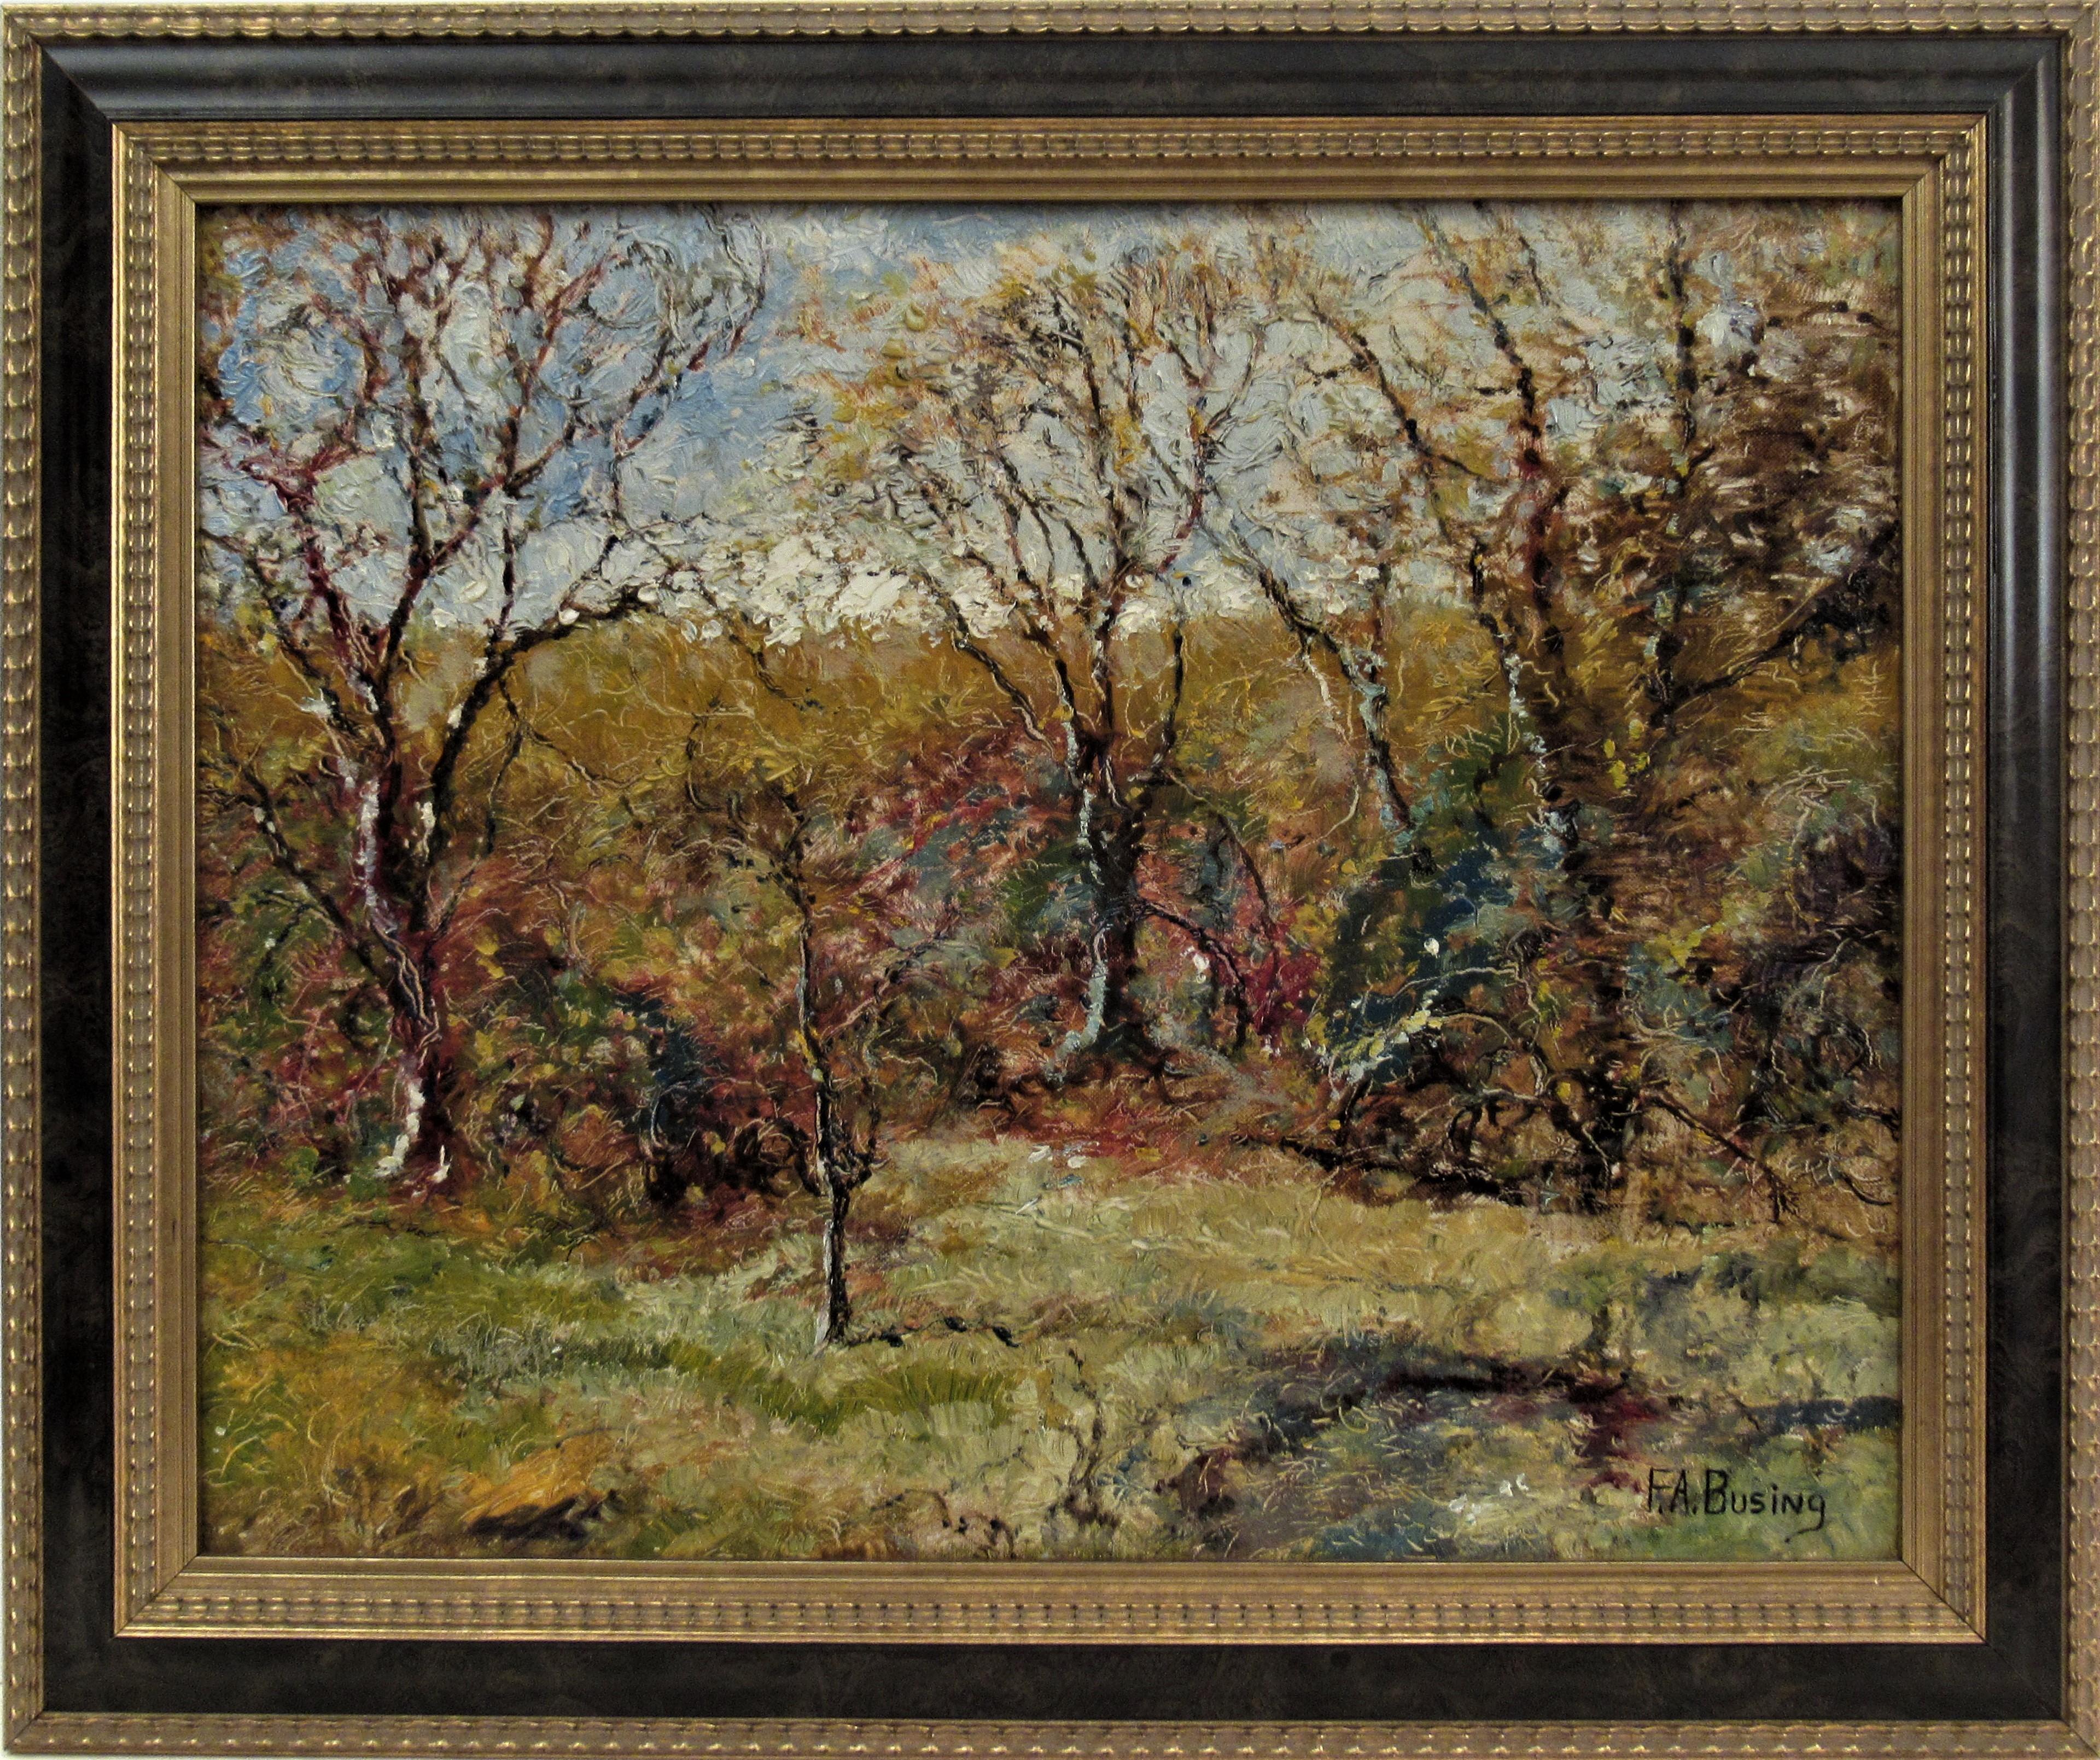 Ferdinand A. Busing Landscape Painting - Landscape with Trees